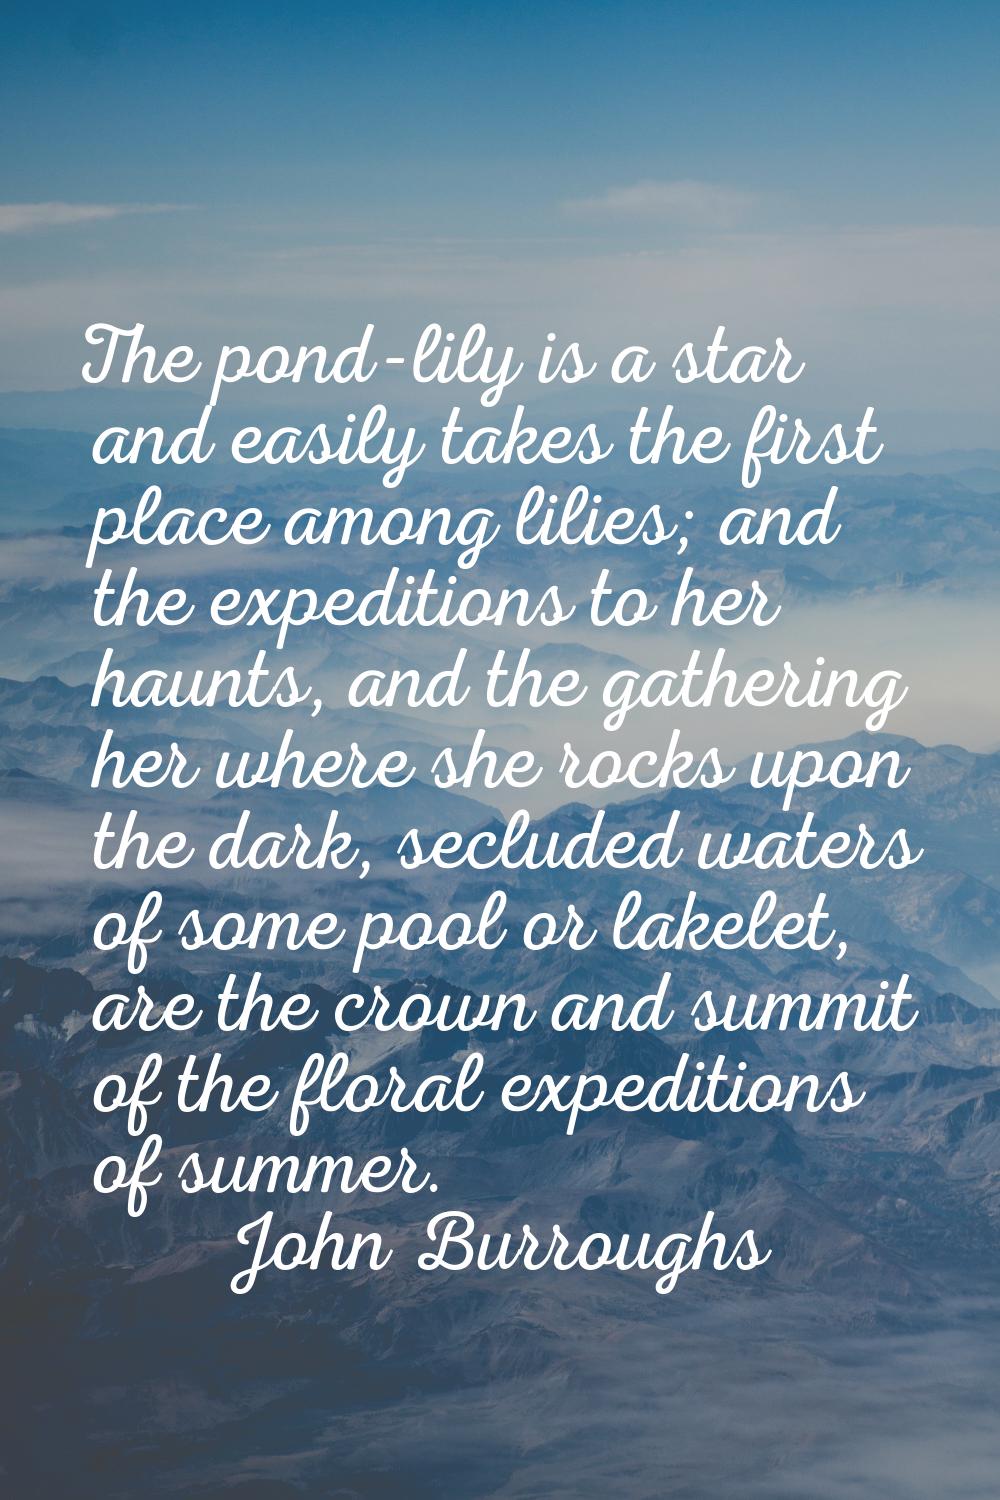 The pond-lily is a star and easily takes the first place among lilies; and the expeditions to her h